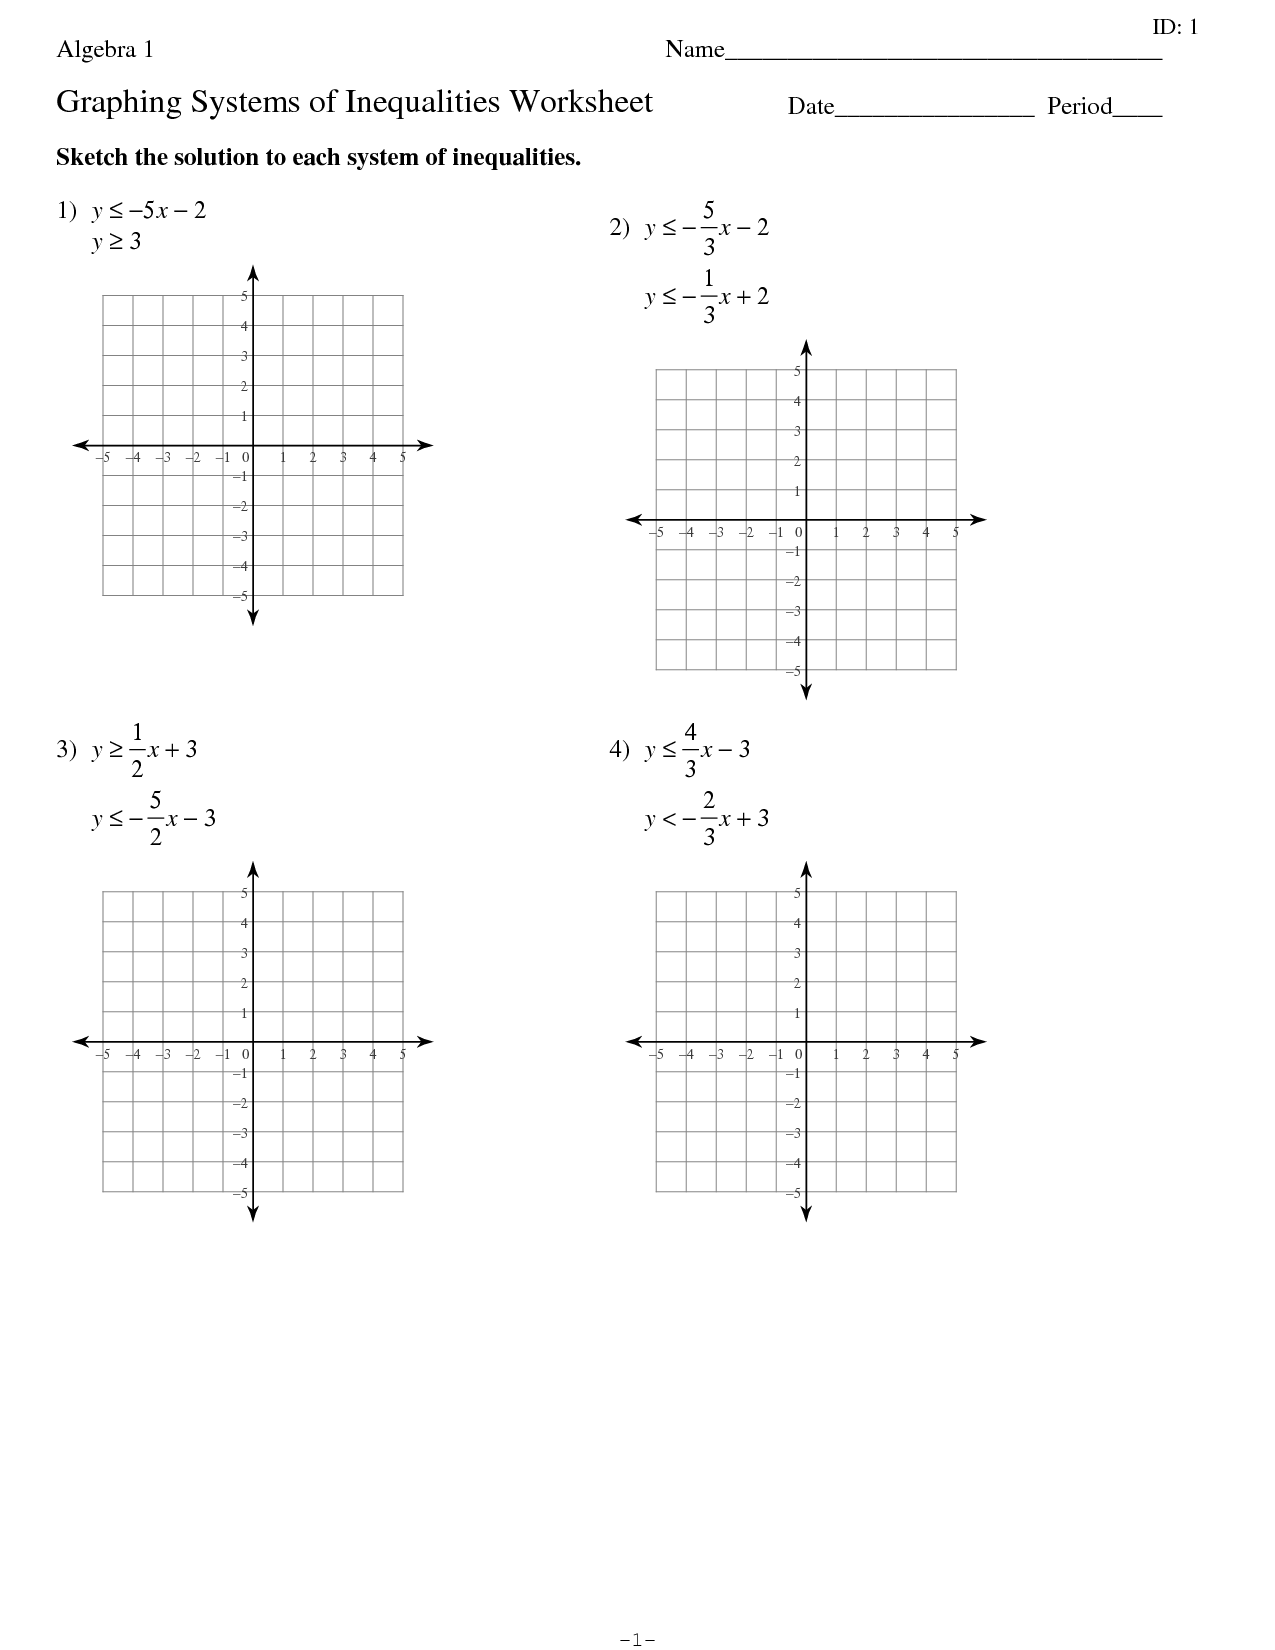 Graphing Systems of Linear Inequalities EdBoost - Worksheet Pertaining To Graphing Systems Of Inequalities Worksheet